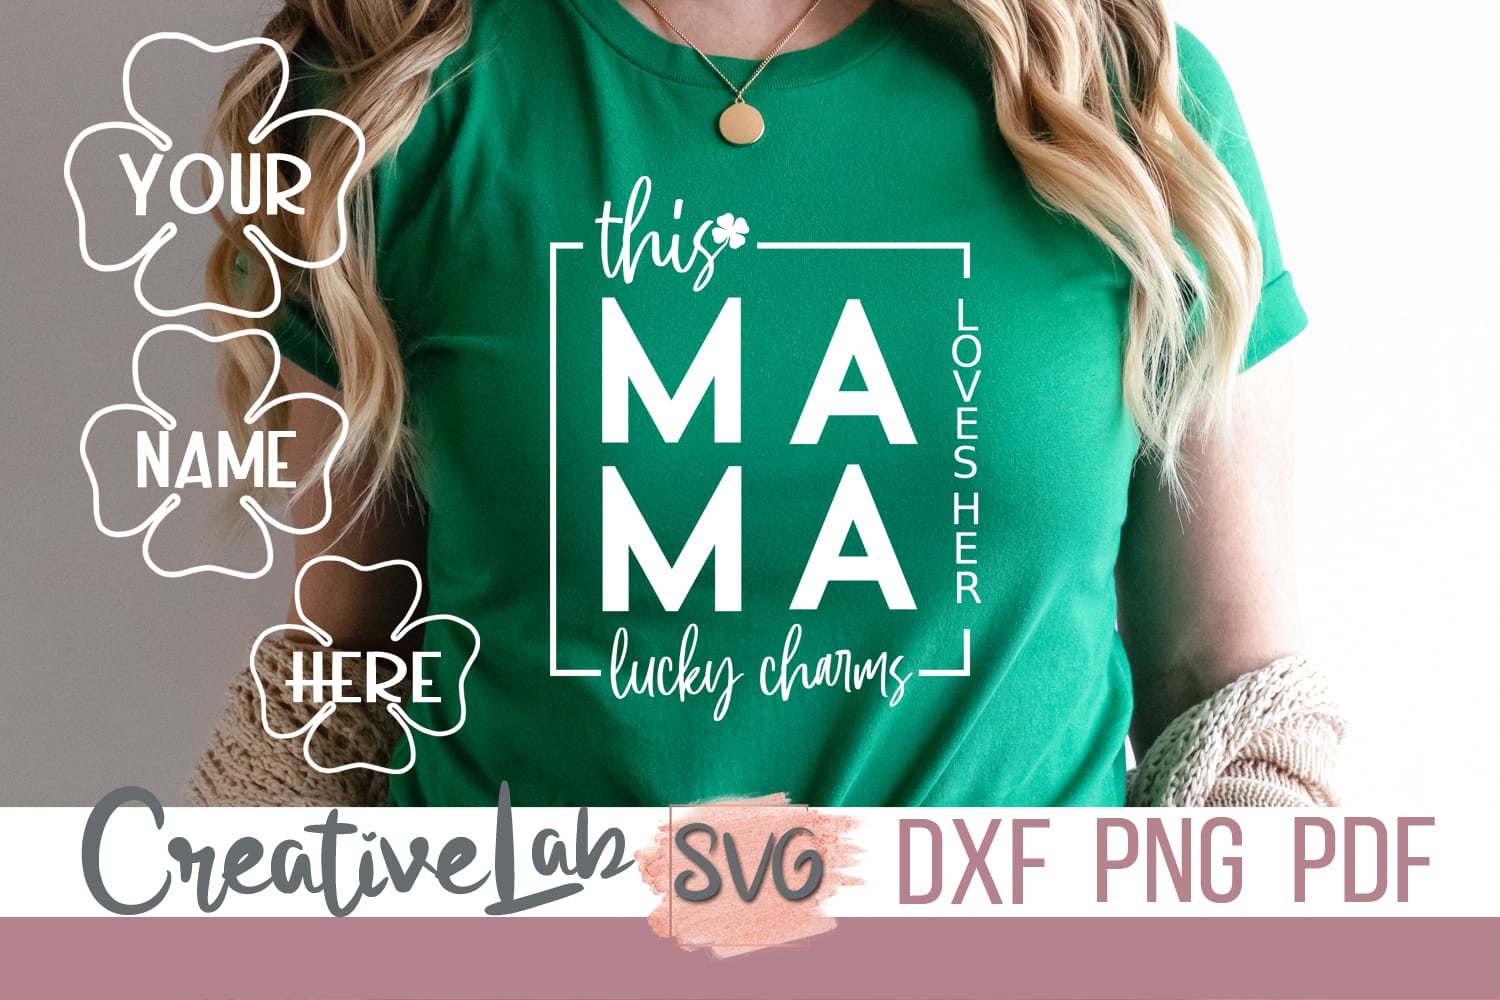 One Lucky Mama SVG Digital File, Mama's Lucky Charm Svg